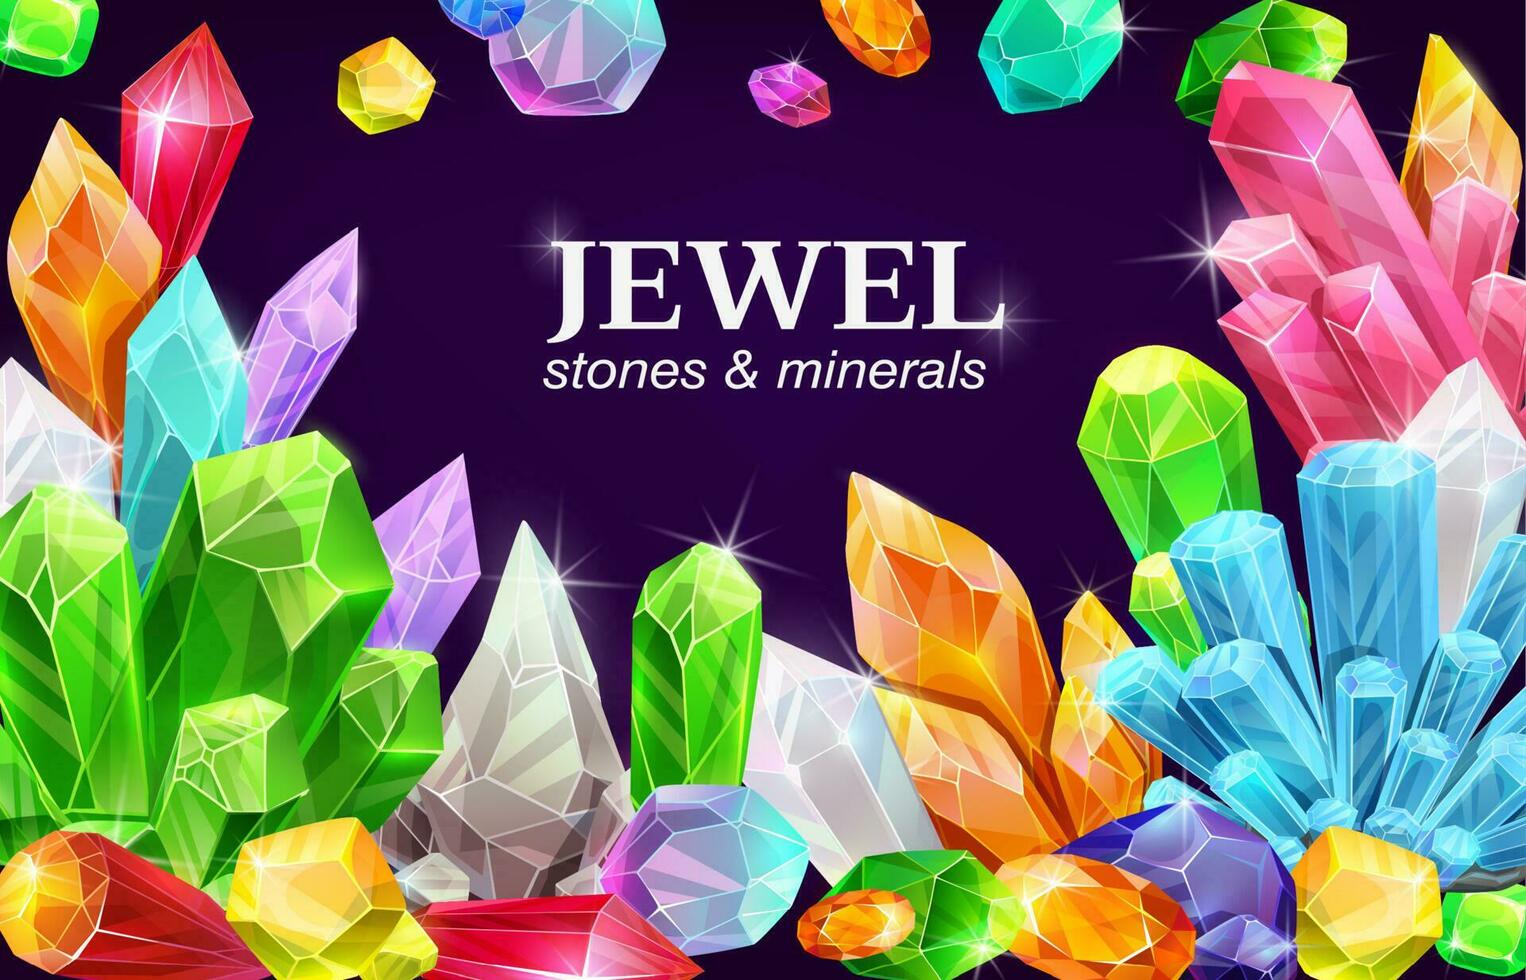 Shiny jewel, gemstomes and crystals vector poster